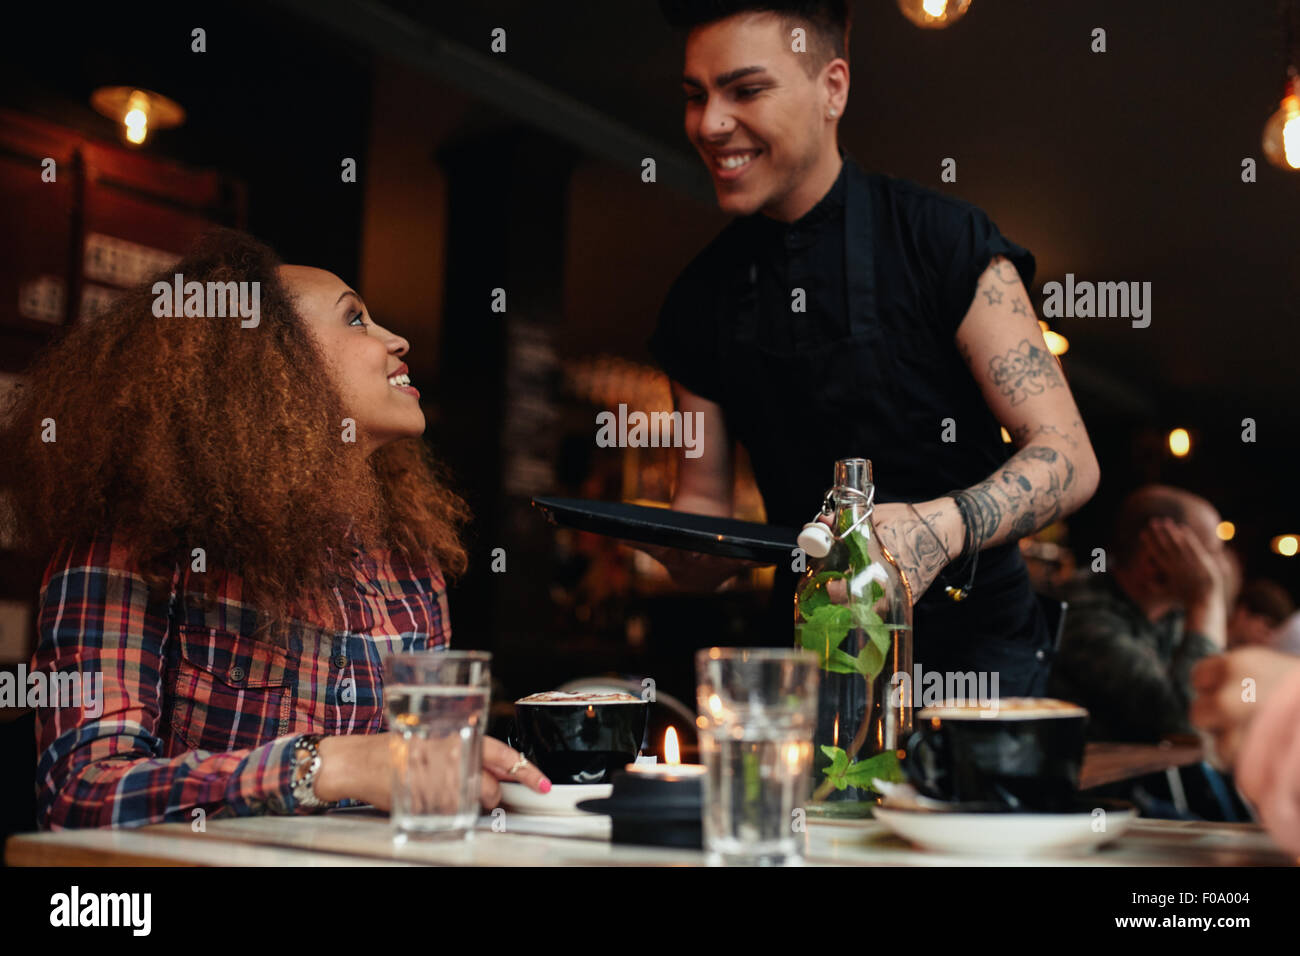 Woman talking to waiter at restaurant. Young woman sitting at cafe with waiter standing by smiling. Stock Photo